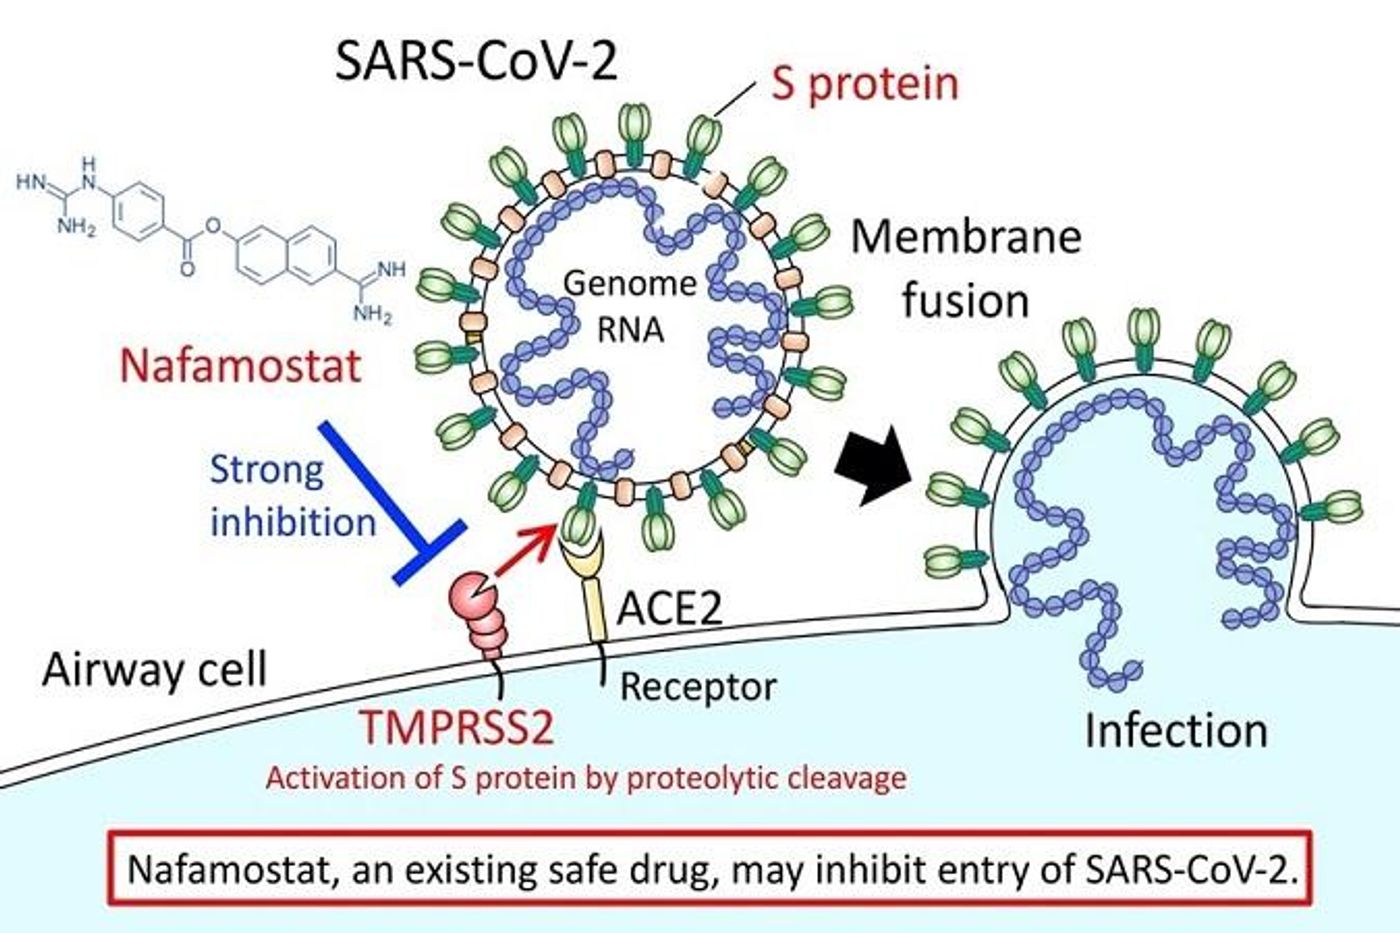 Nafamostat, an existing safe drug, may inhibit entry of SARS-CoV-2. / Image: 2020 The University of Tokyo.